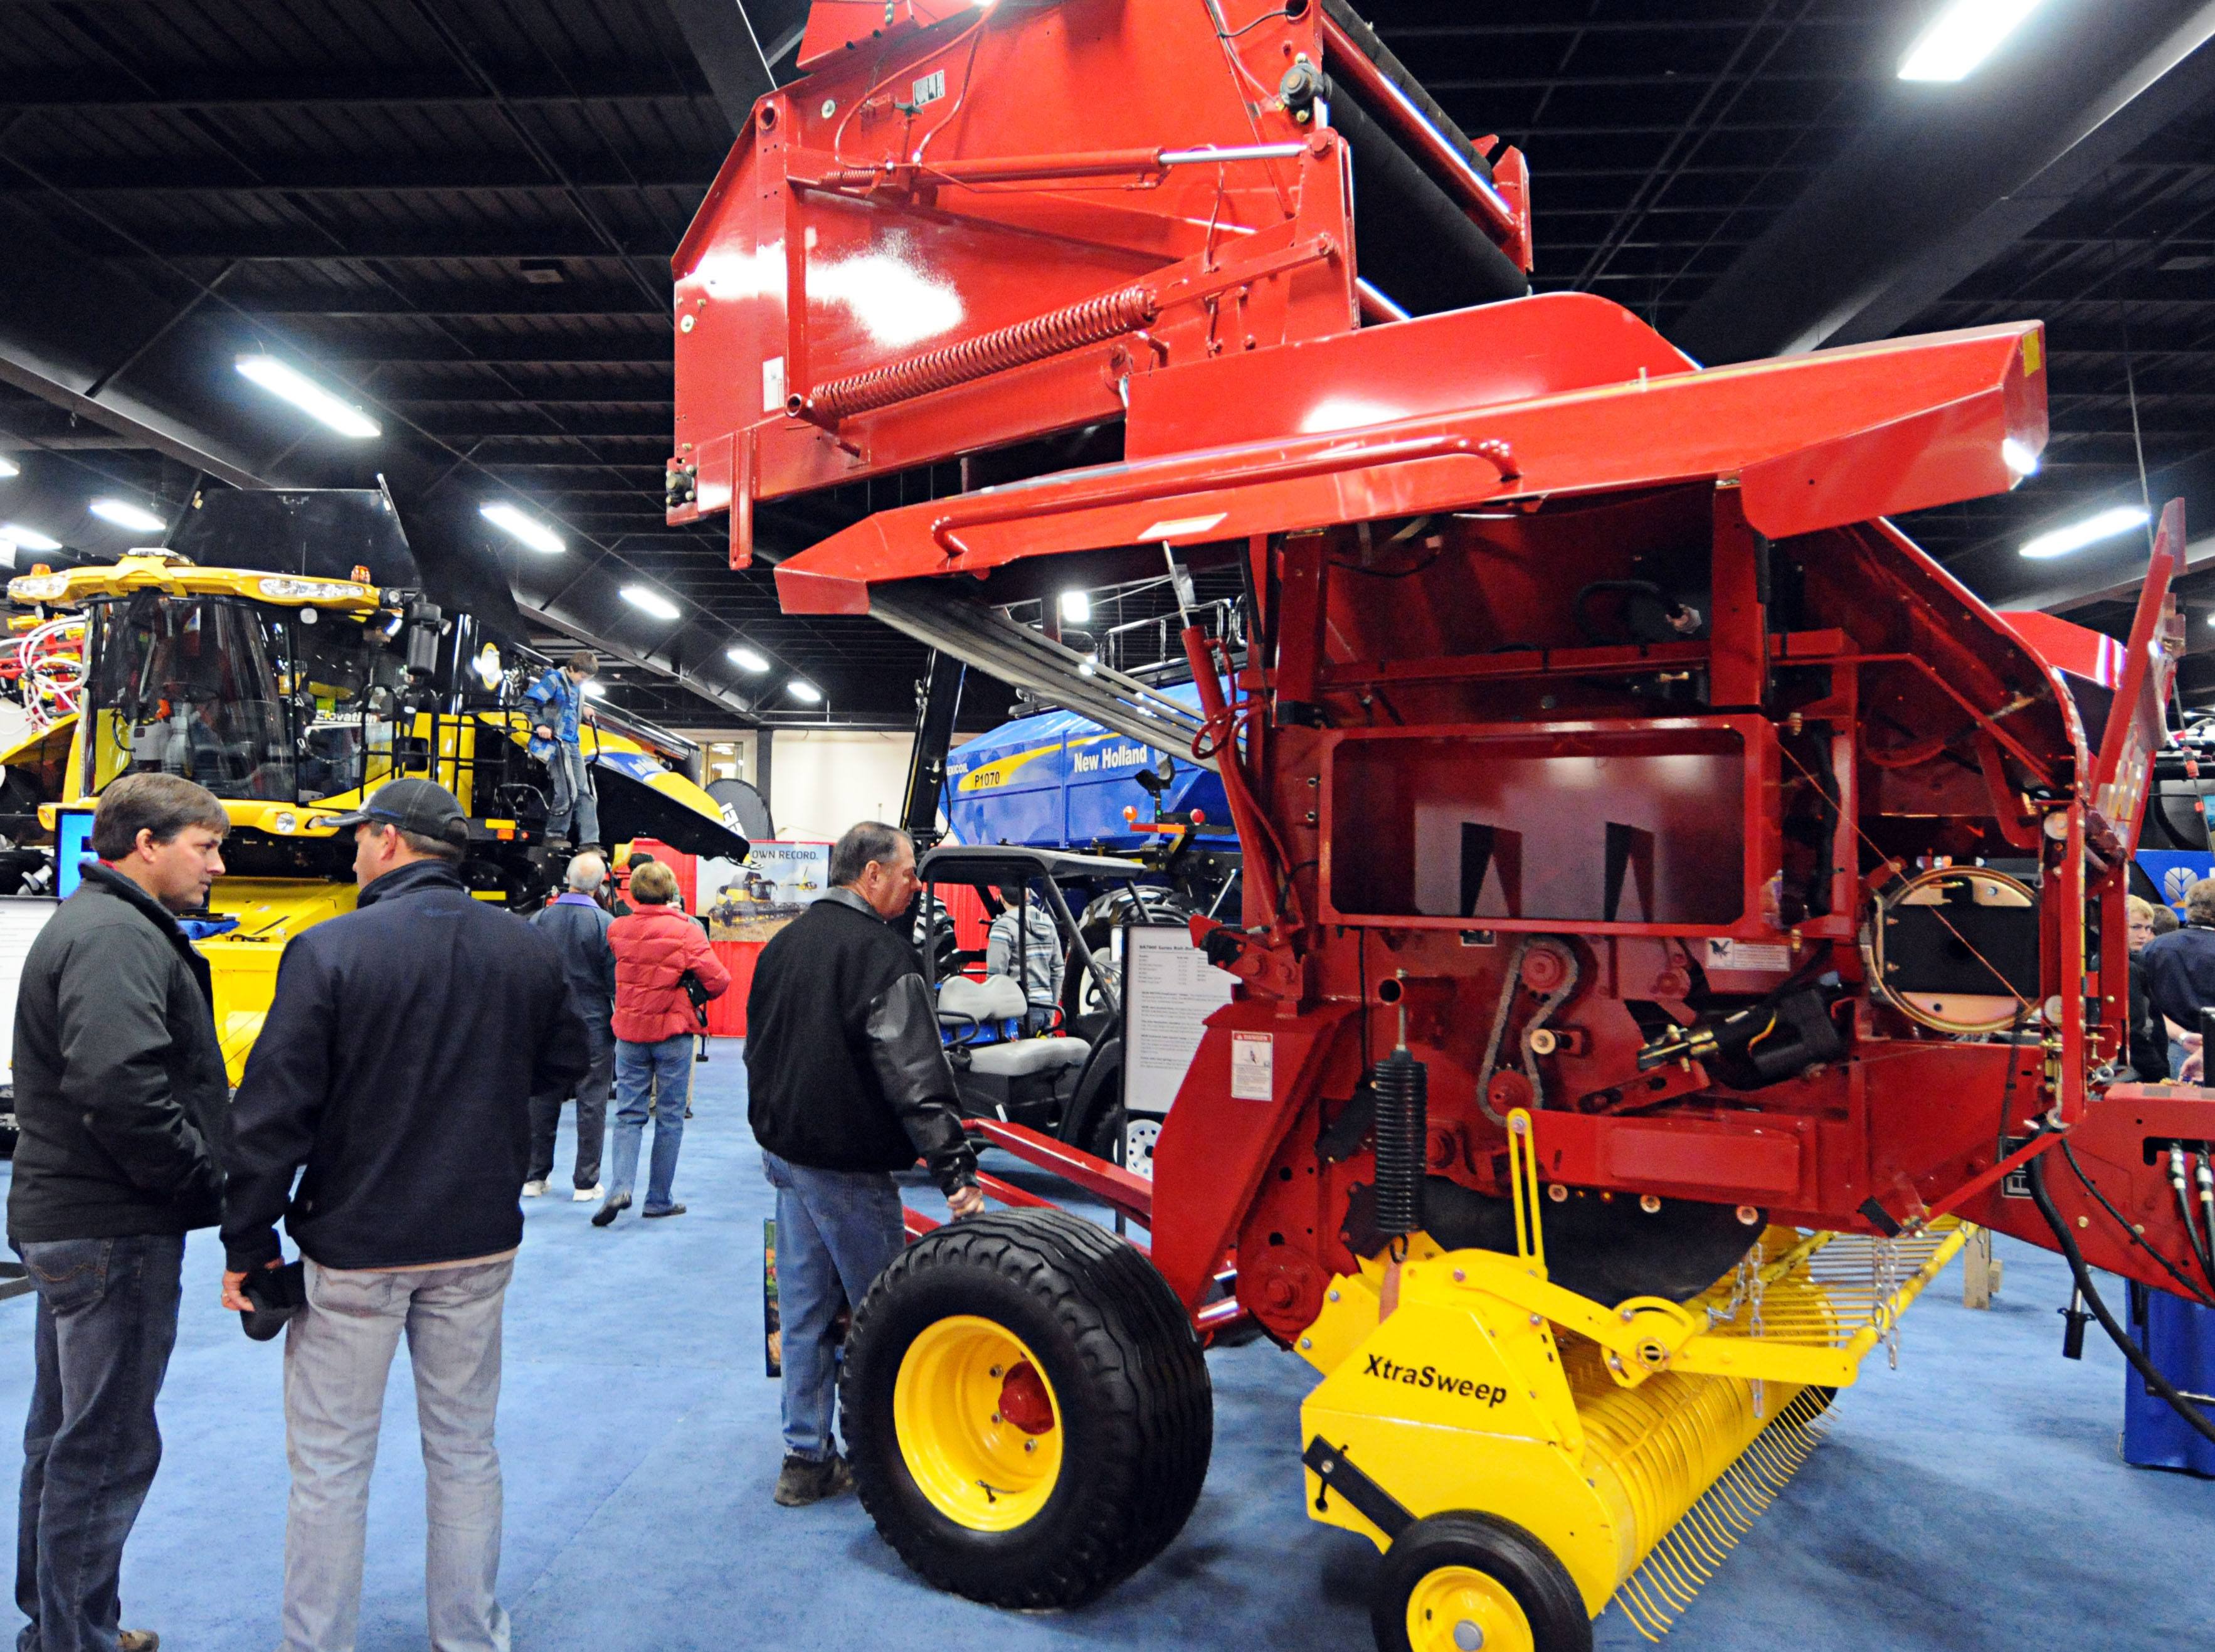 CUTTING EDGE – Visitors of the annual Agri-Trade exposition check out the various exhibits on display. Agri-Trade is an agricultural equipment exposition that was held at the Westerner last week.